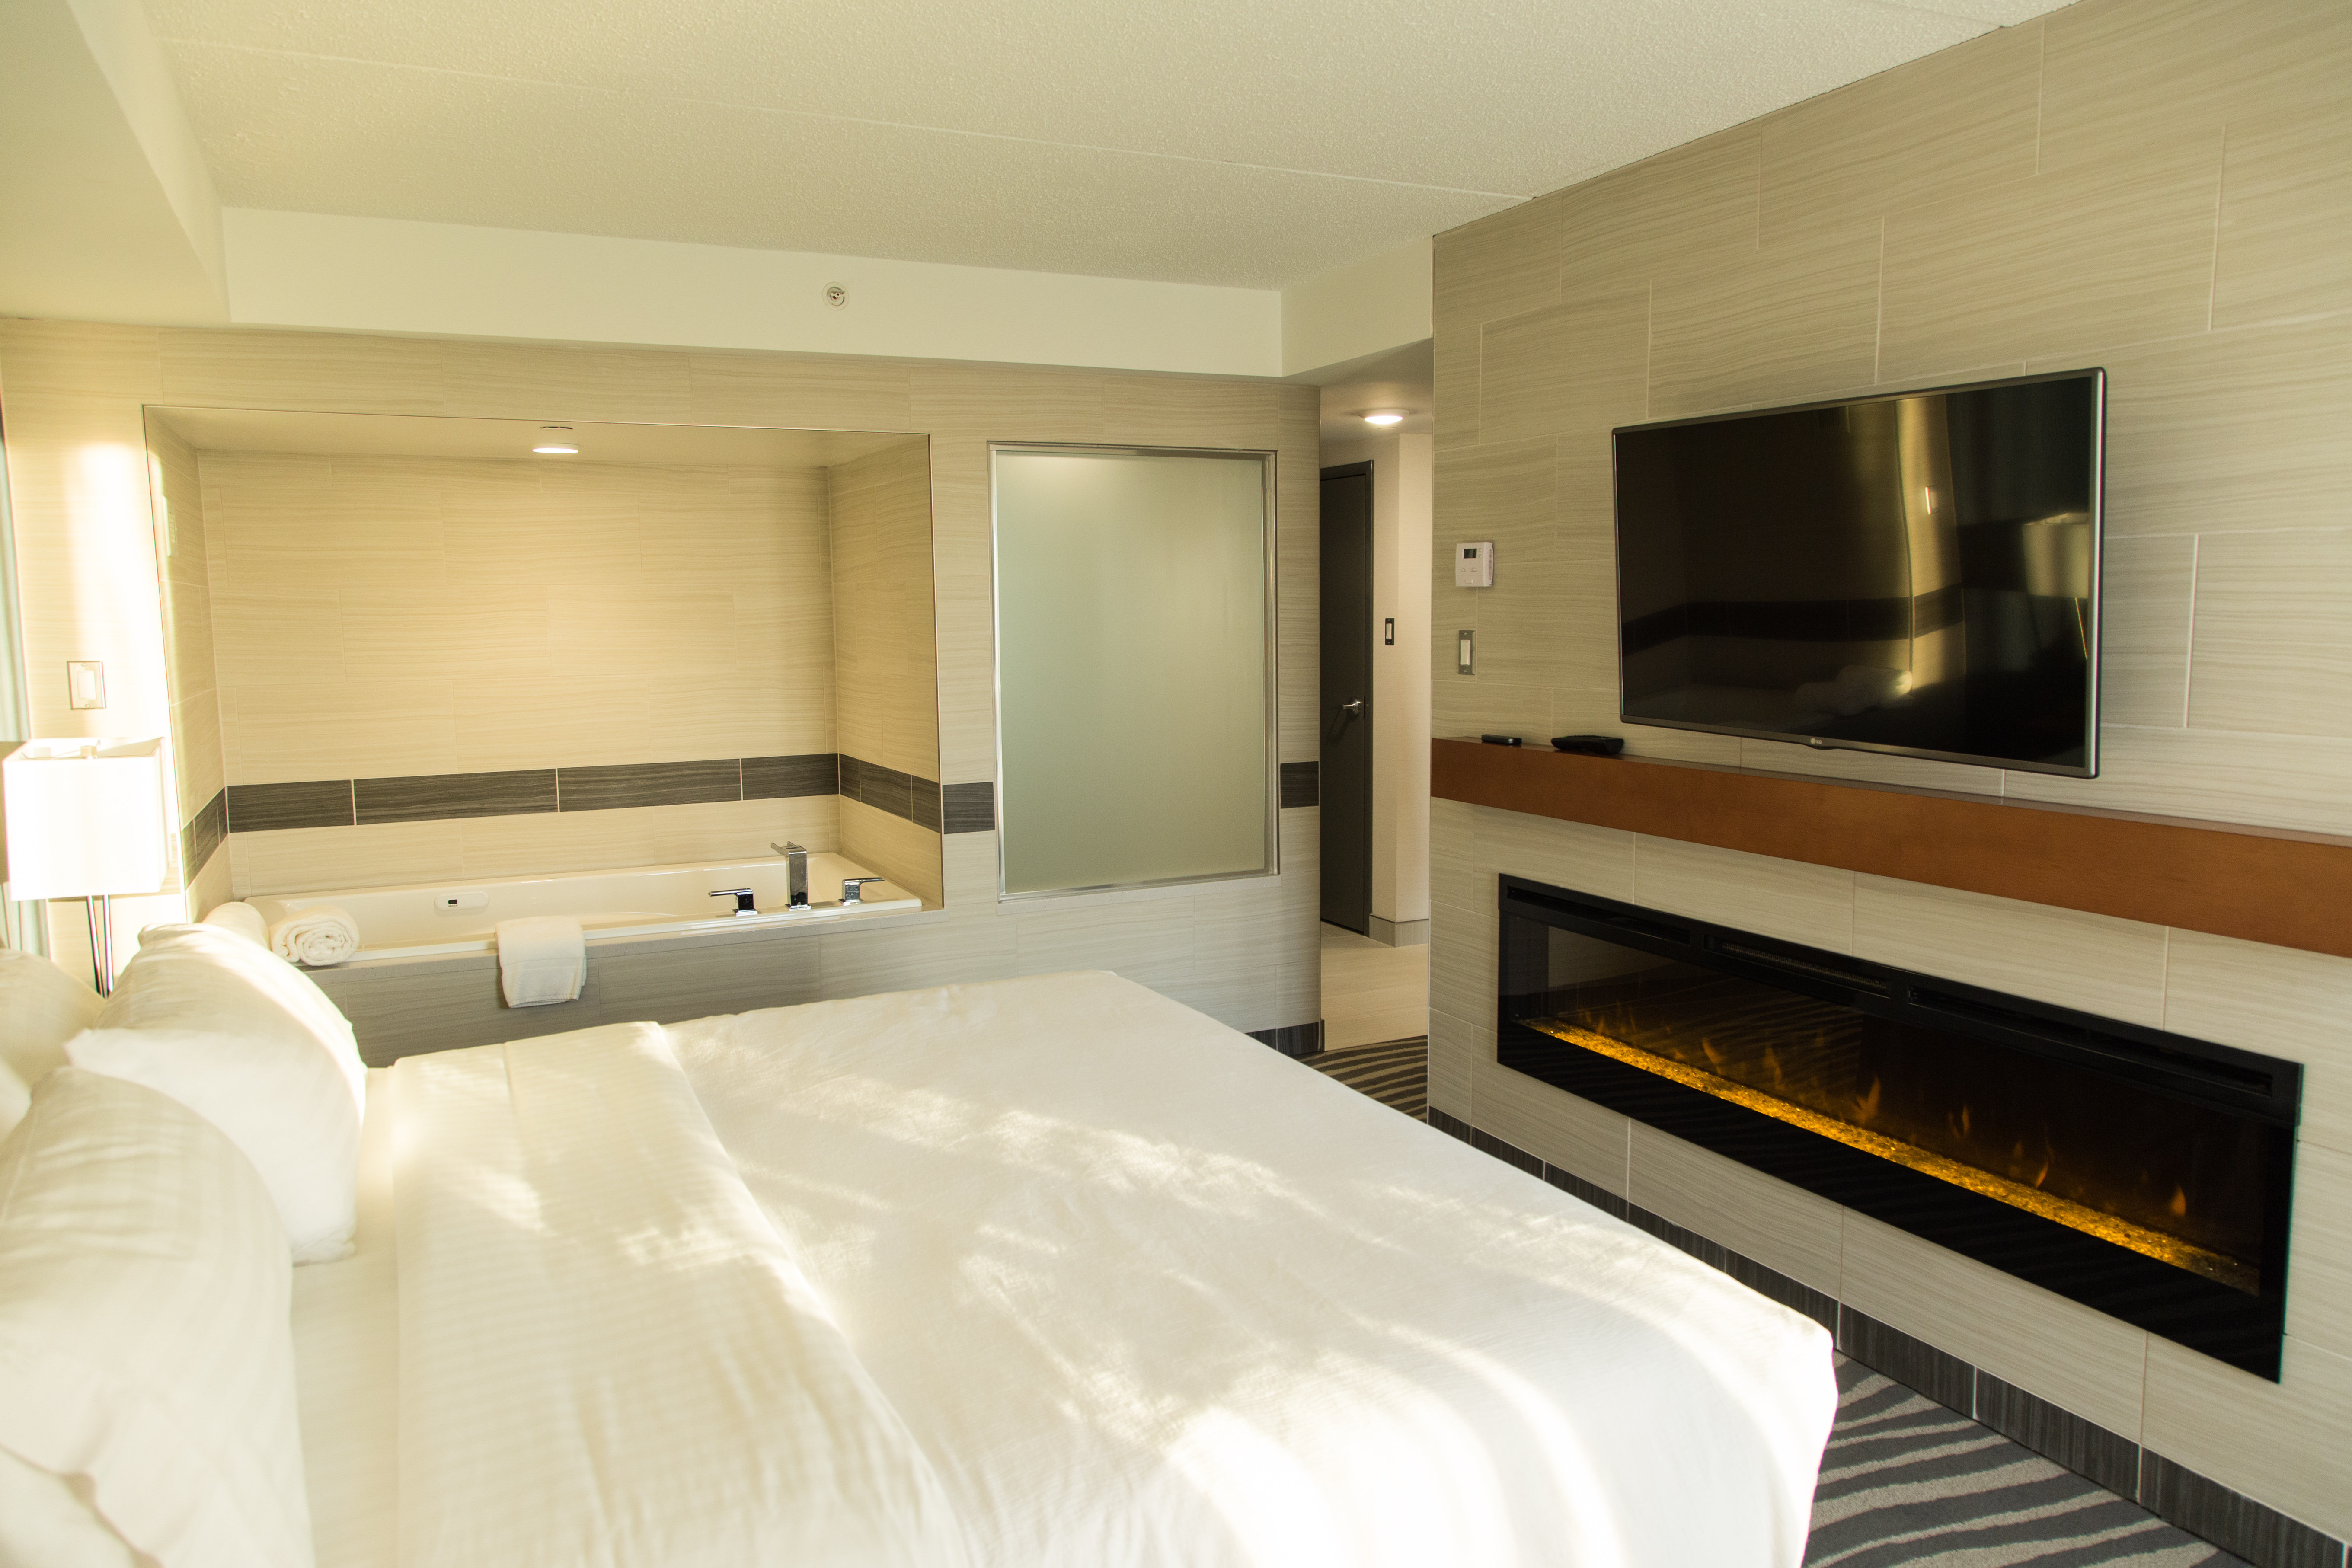 Jacuzzi Suite Bedroom with fireplace and Jet tub